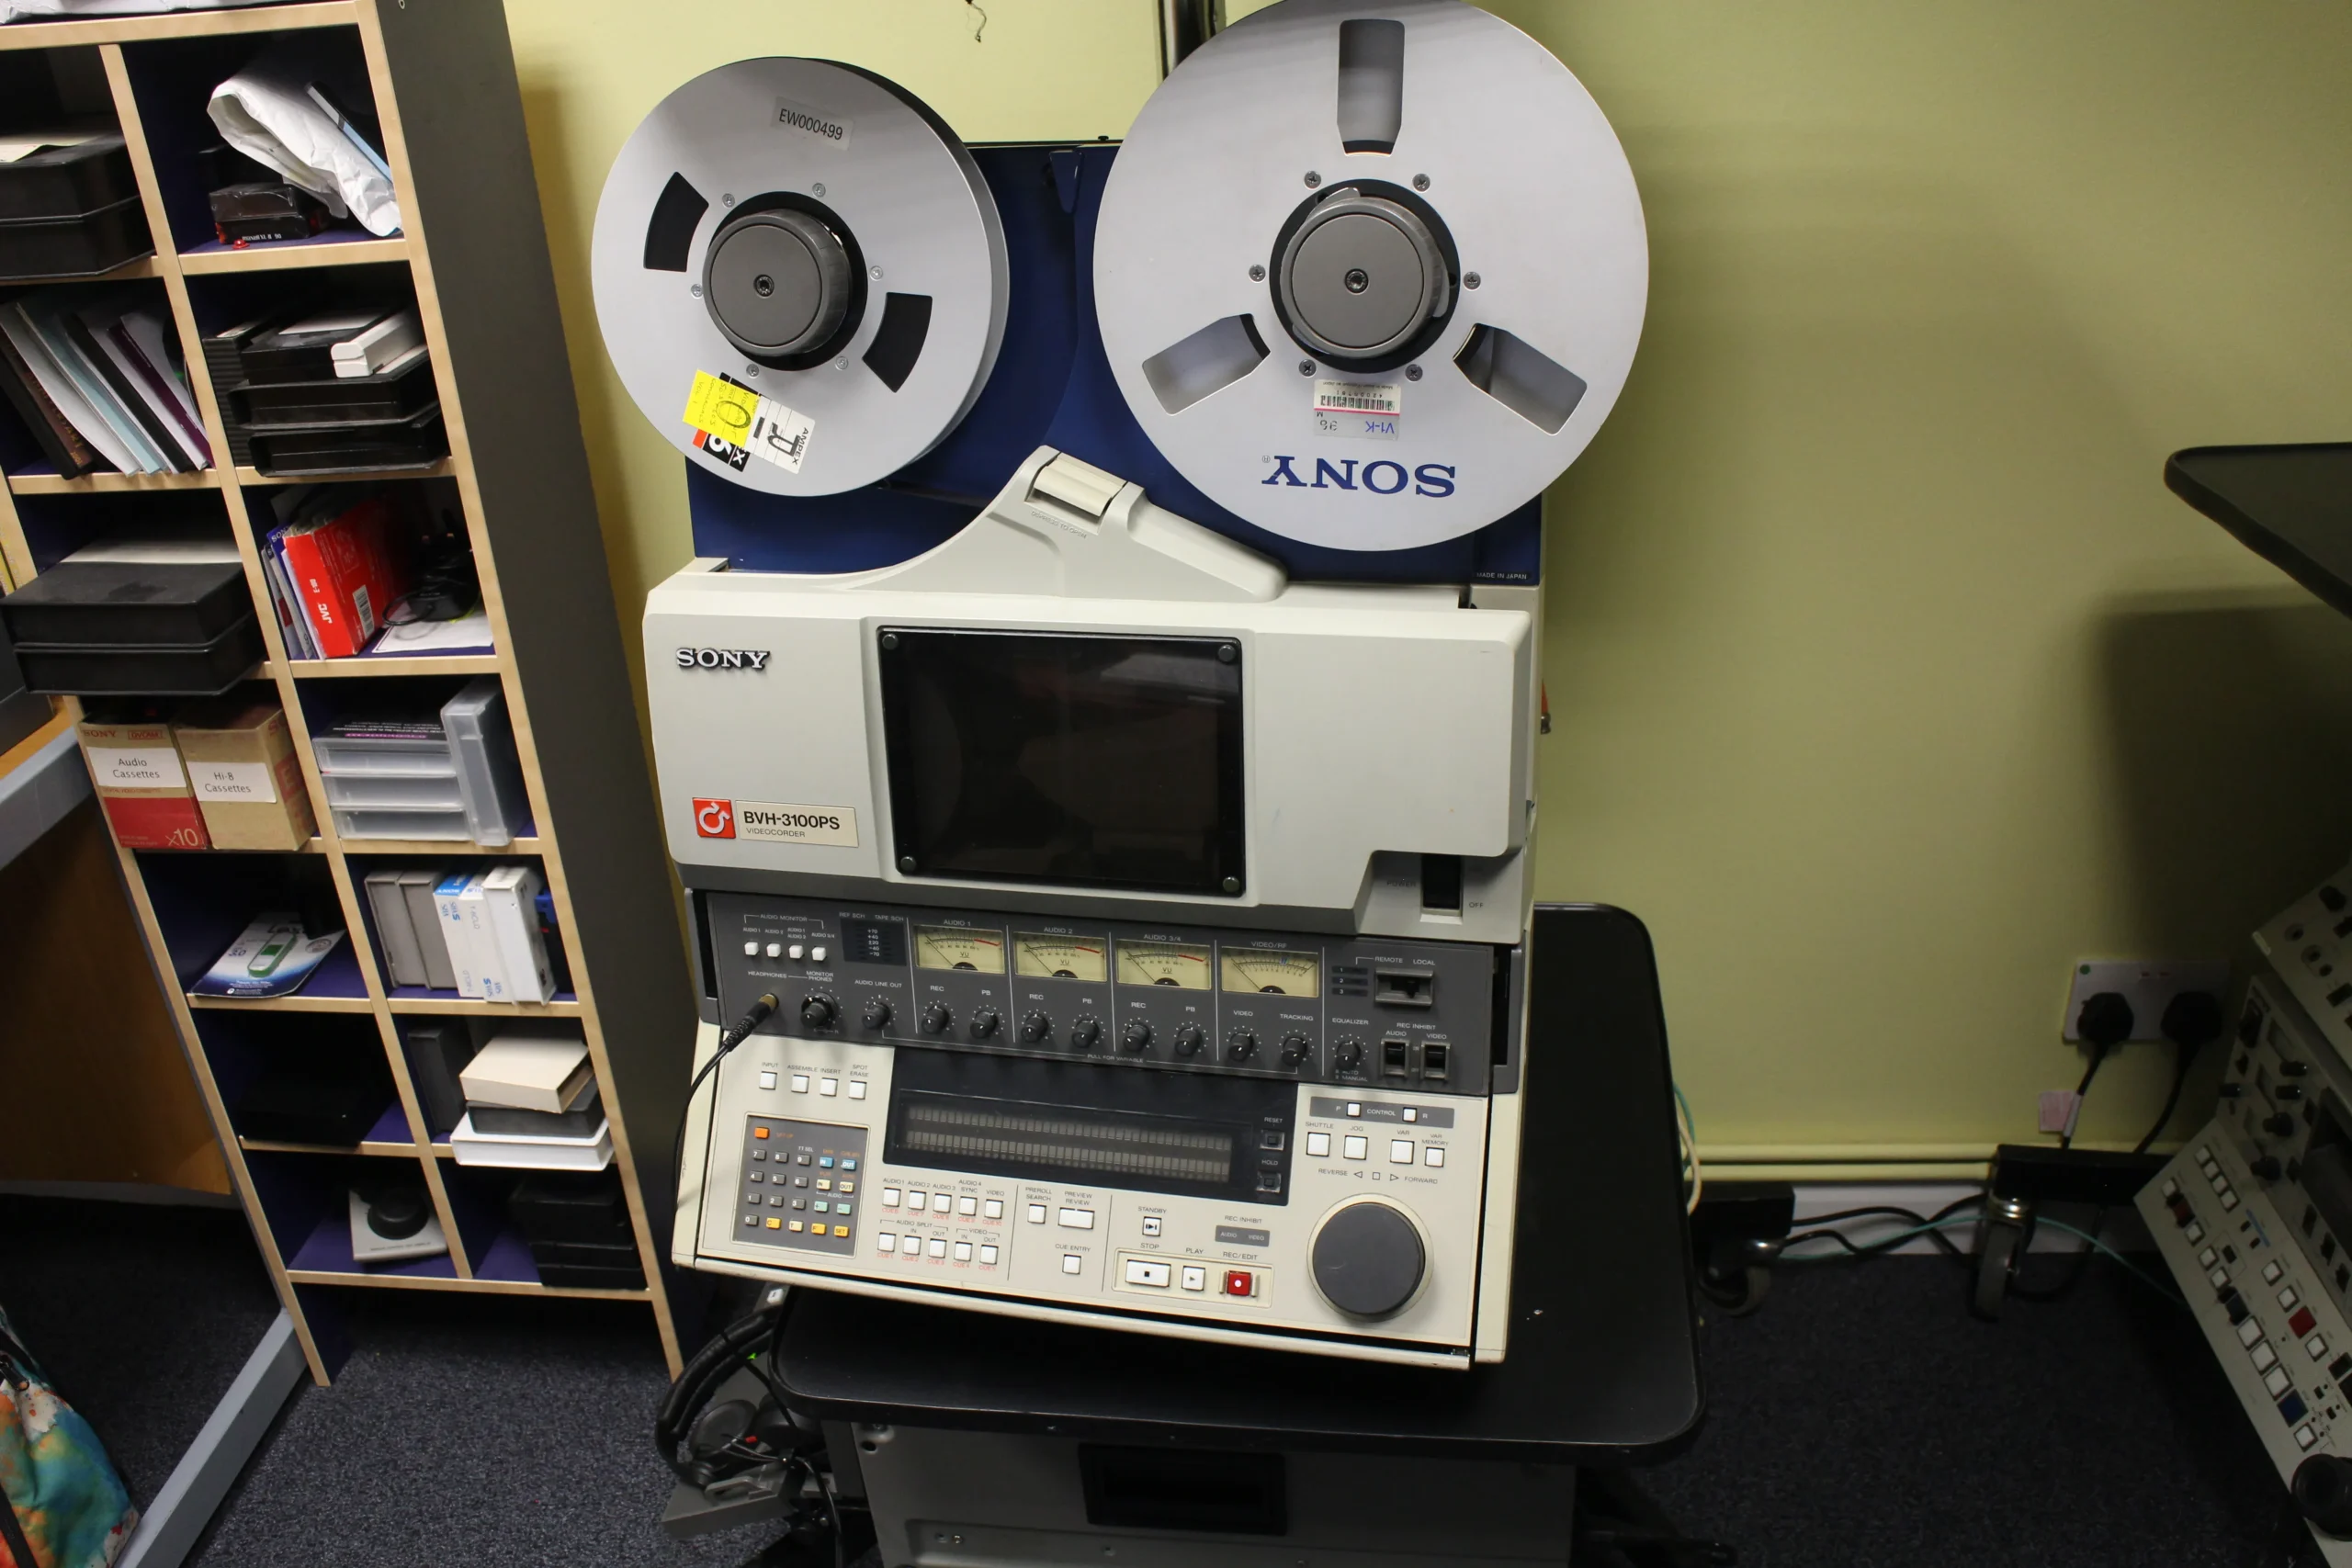 A VCR, or videocassette recorder, is a device used to play and record videos on videocassettes.